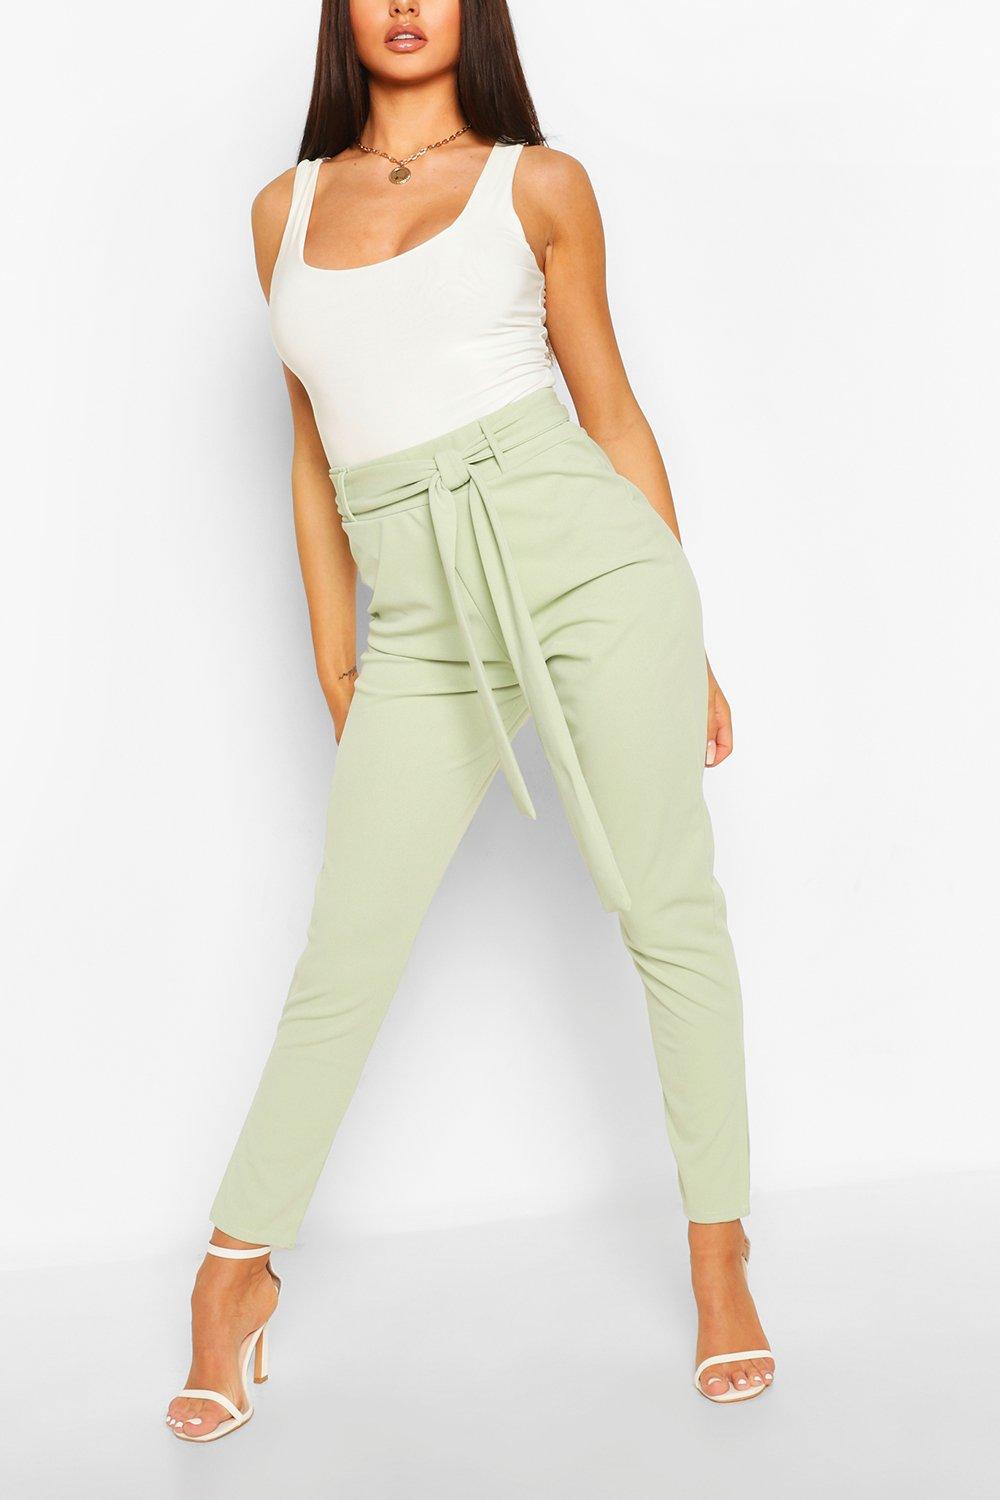 REMY' High Waisted Pants - Olive Green